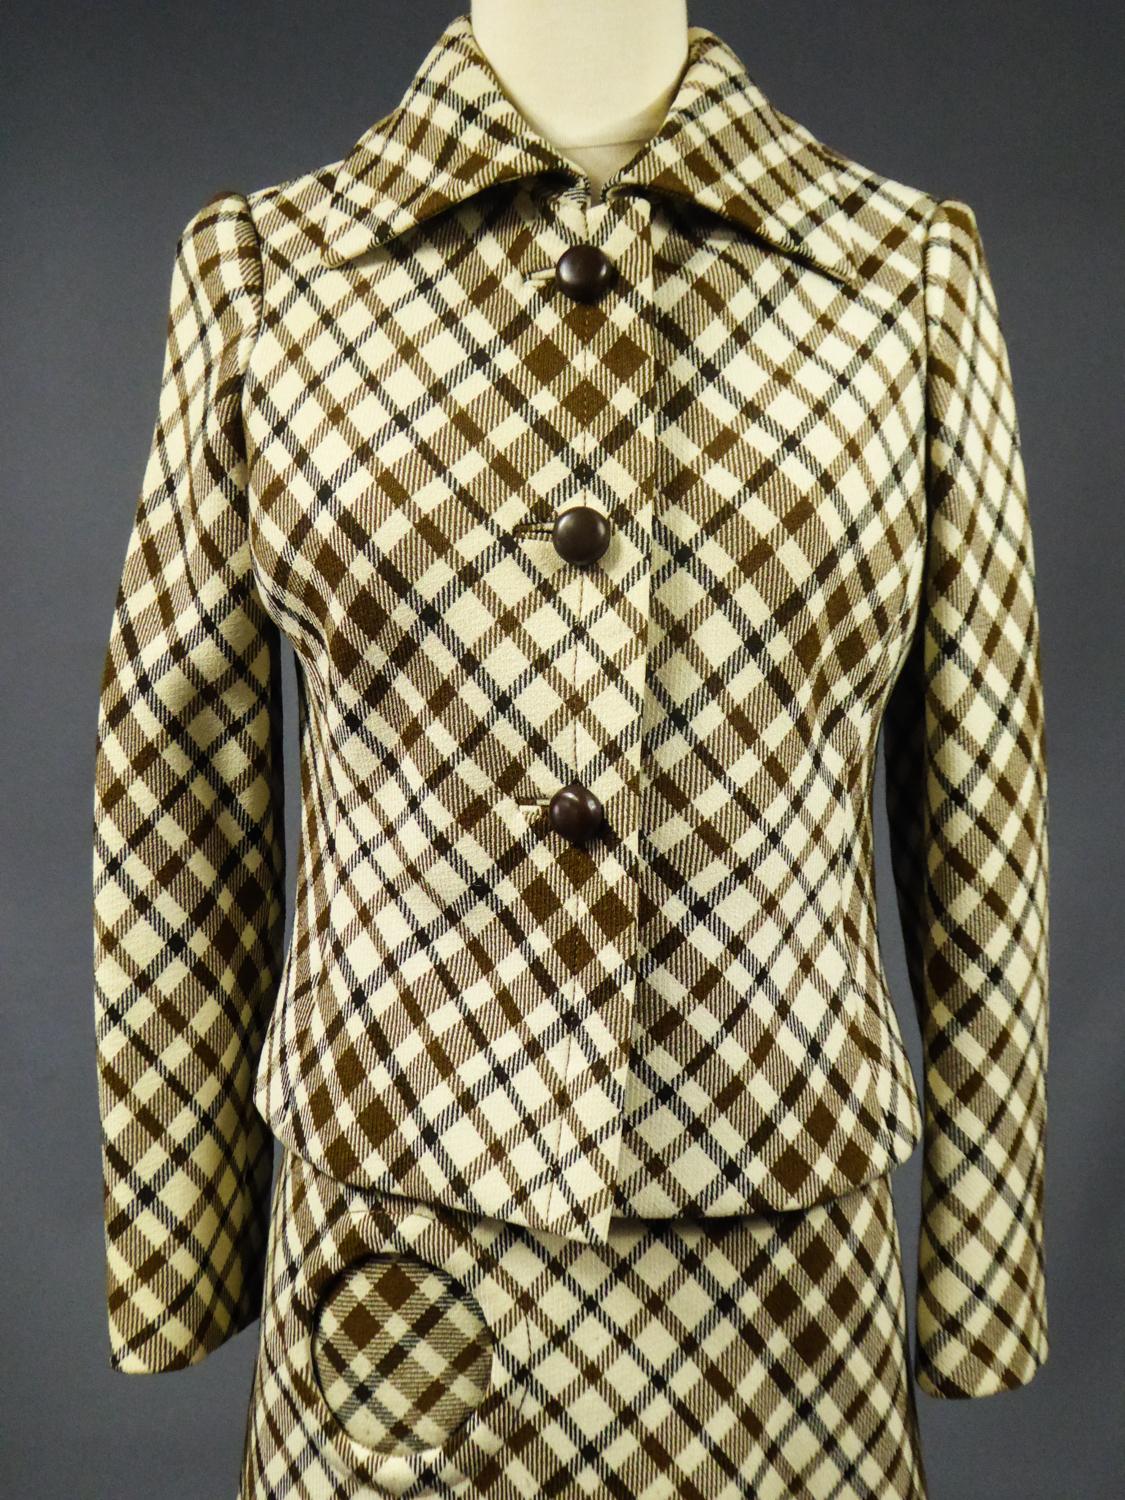 Circa 1968
France

Checked Skirt Suit in wool demi-Couture Christian Dior signed by Bérénice Haute Couture in Marseille and dating from the Modernist period of the late 1960s. Fitted jacket with front closure by three buttons in brown plastic and